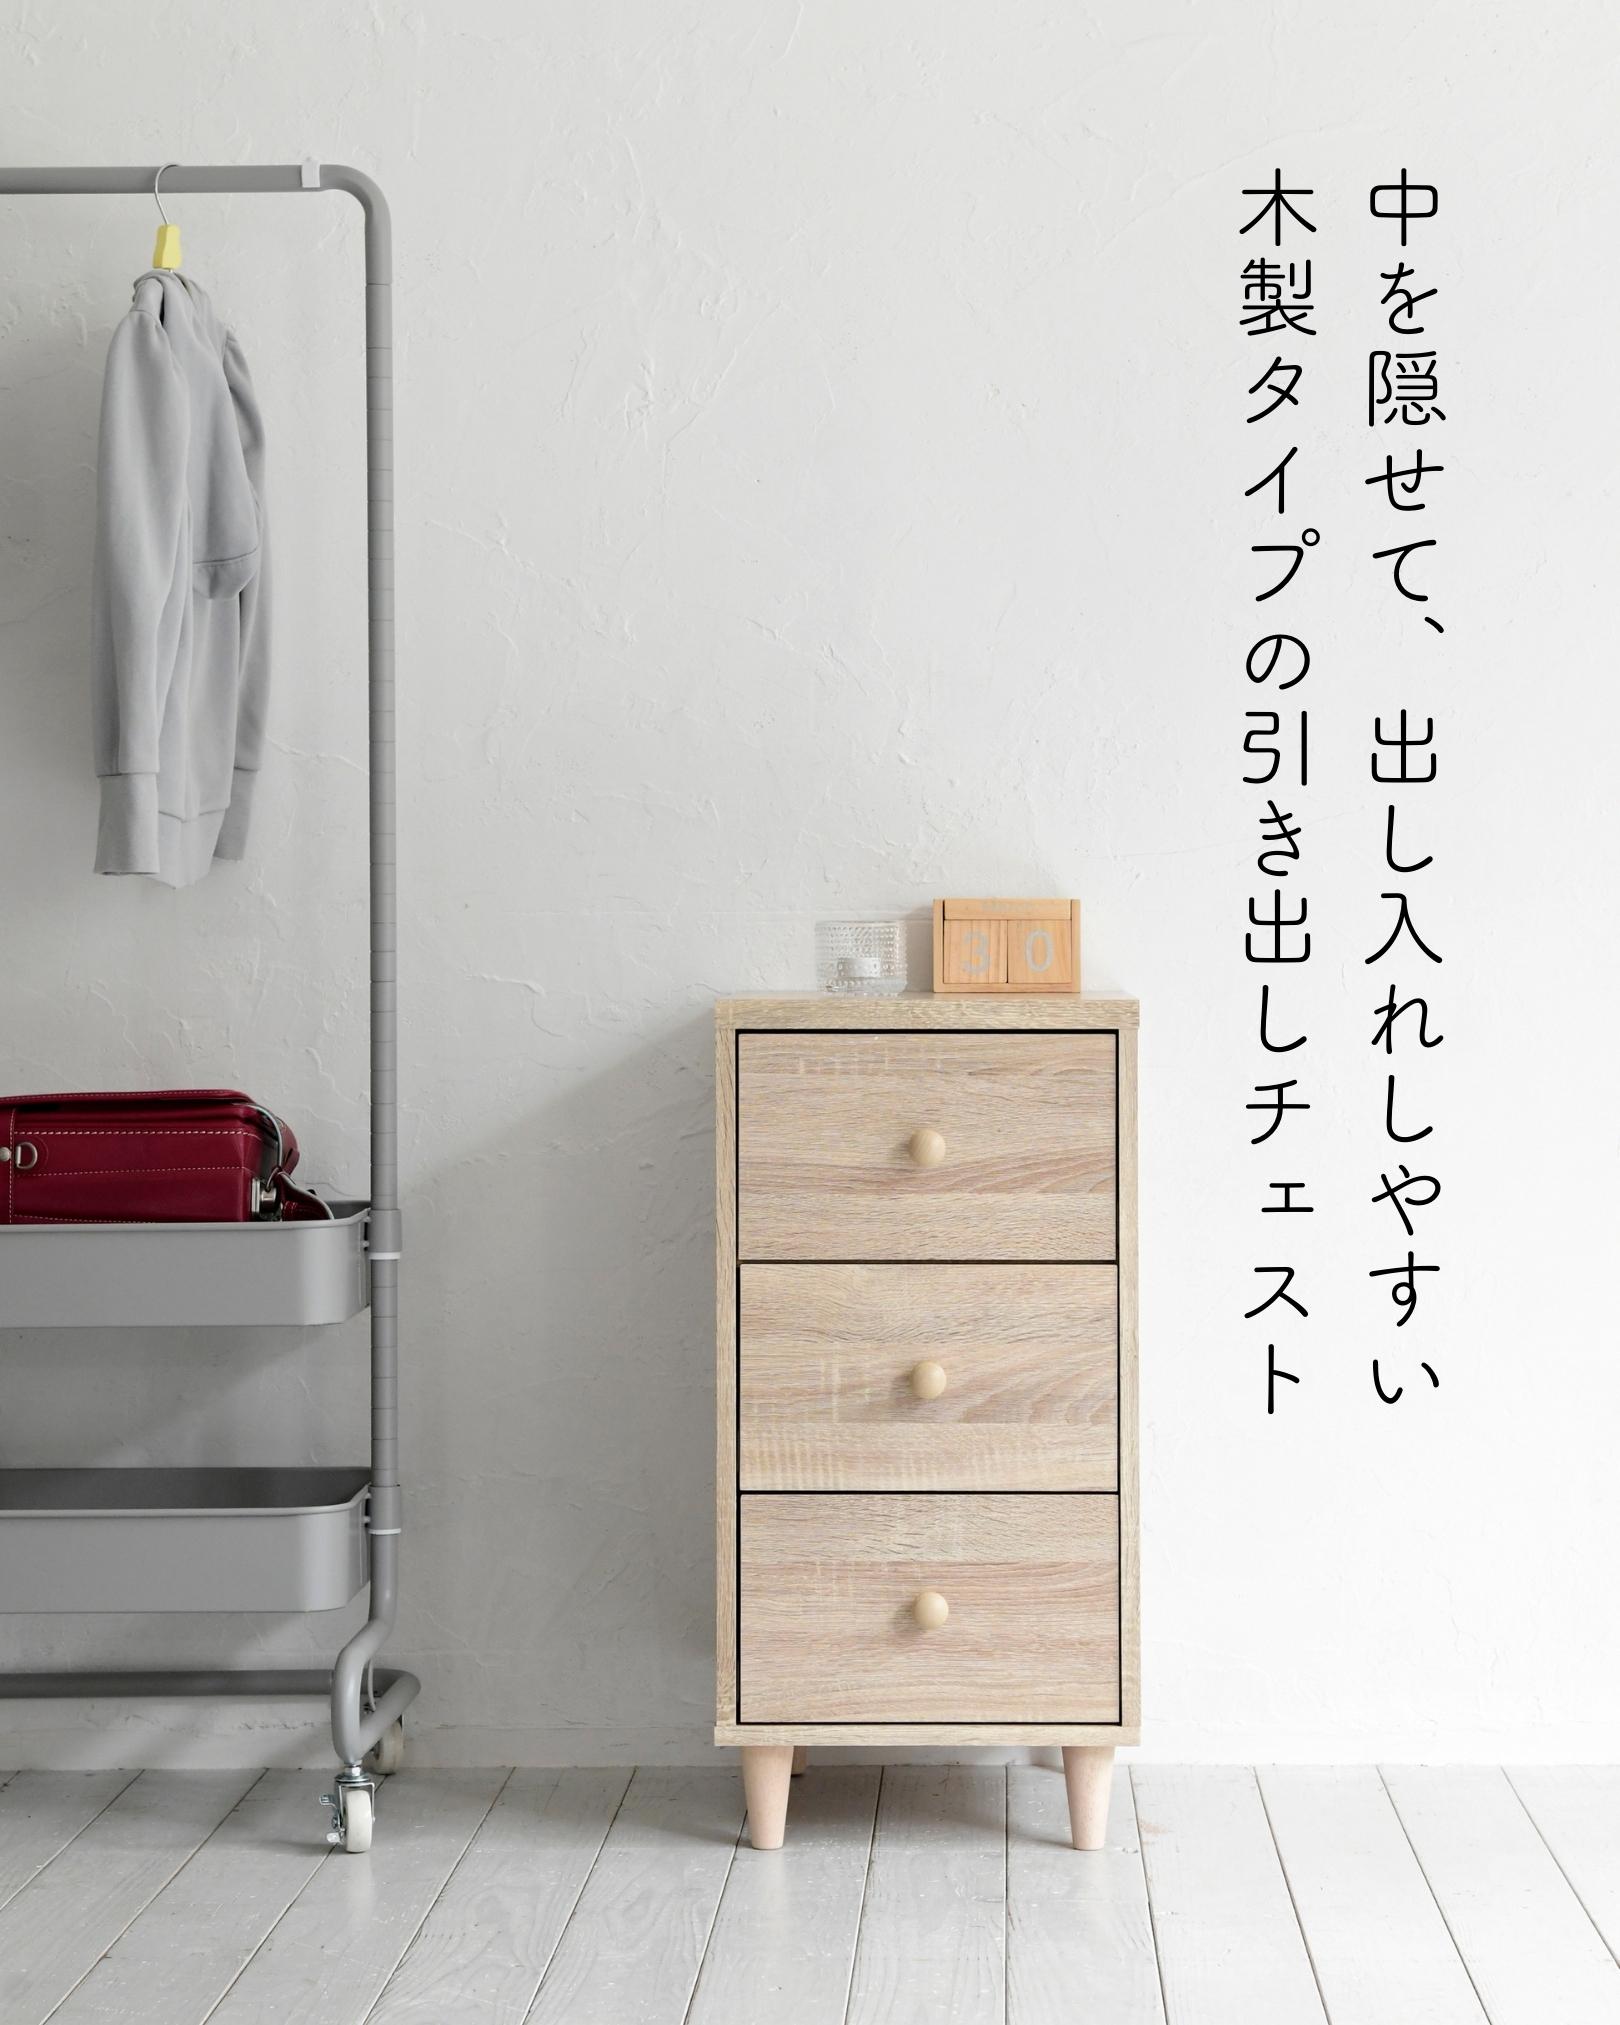  dust. entering difficult wooden chest slim 3 step width 34 depth 42 height 68.5cm lavatory child part shop closet storage laundry chest one person living drawer mountain .